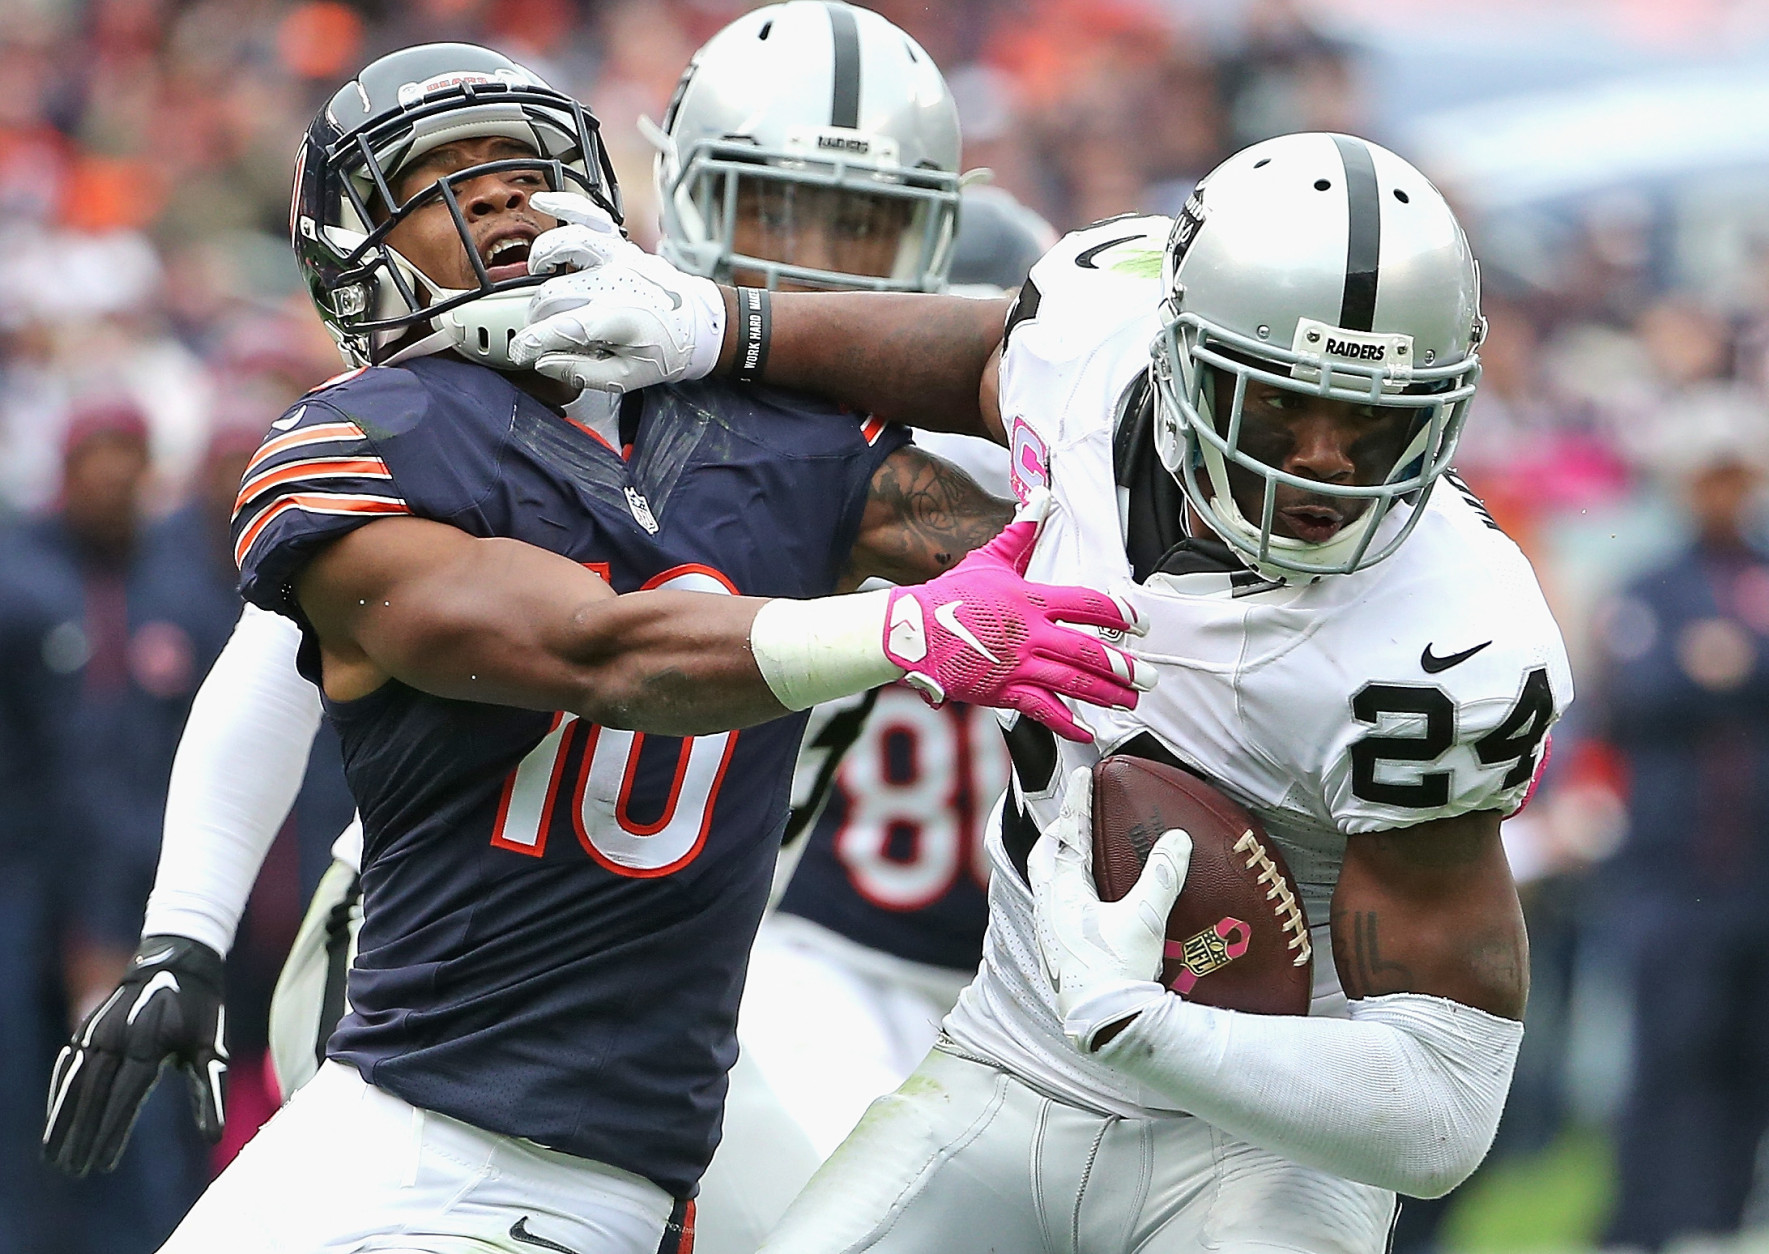 CHICAGO, IL - OCTOBER 04: Charles Woodson #24 of the Oakland Raiders breaks way from Marquess Wilson #10 of the Chicago Bears after intercepting a pass in the 4th quarter at Soldier Field on October 4, 2015 in Chicago, Illinois. The Bears defeated the Raiders 22-20. (Photo by Jonathan Daniel/Getty Images)